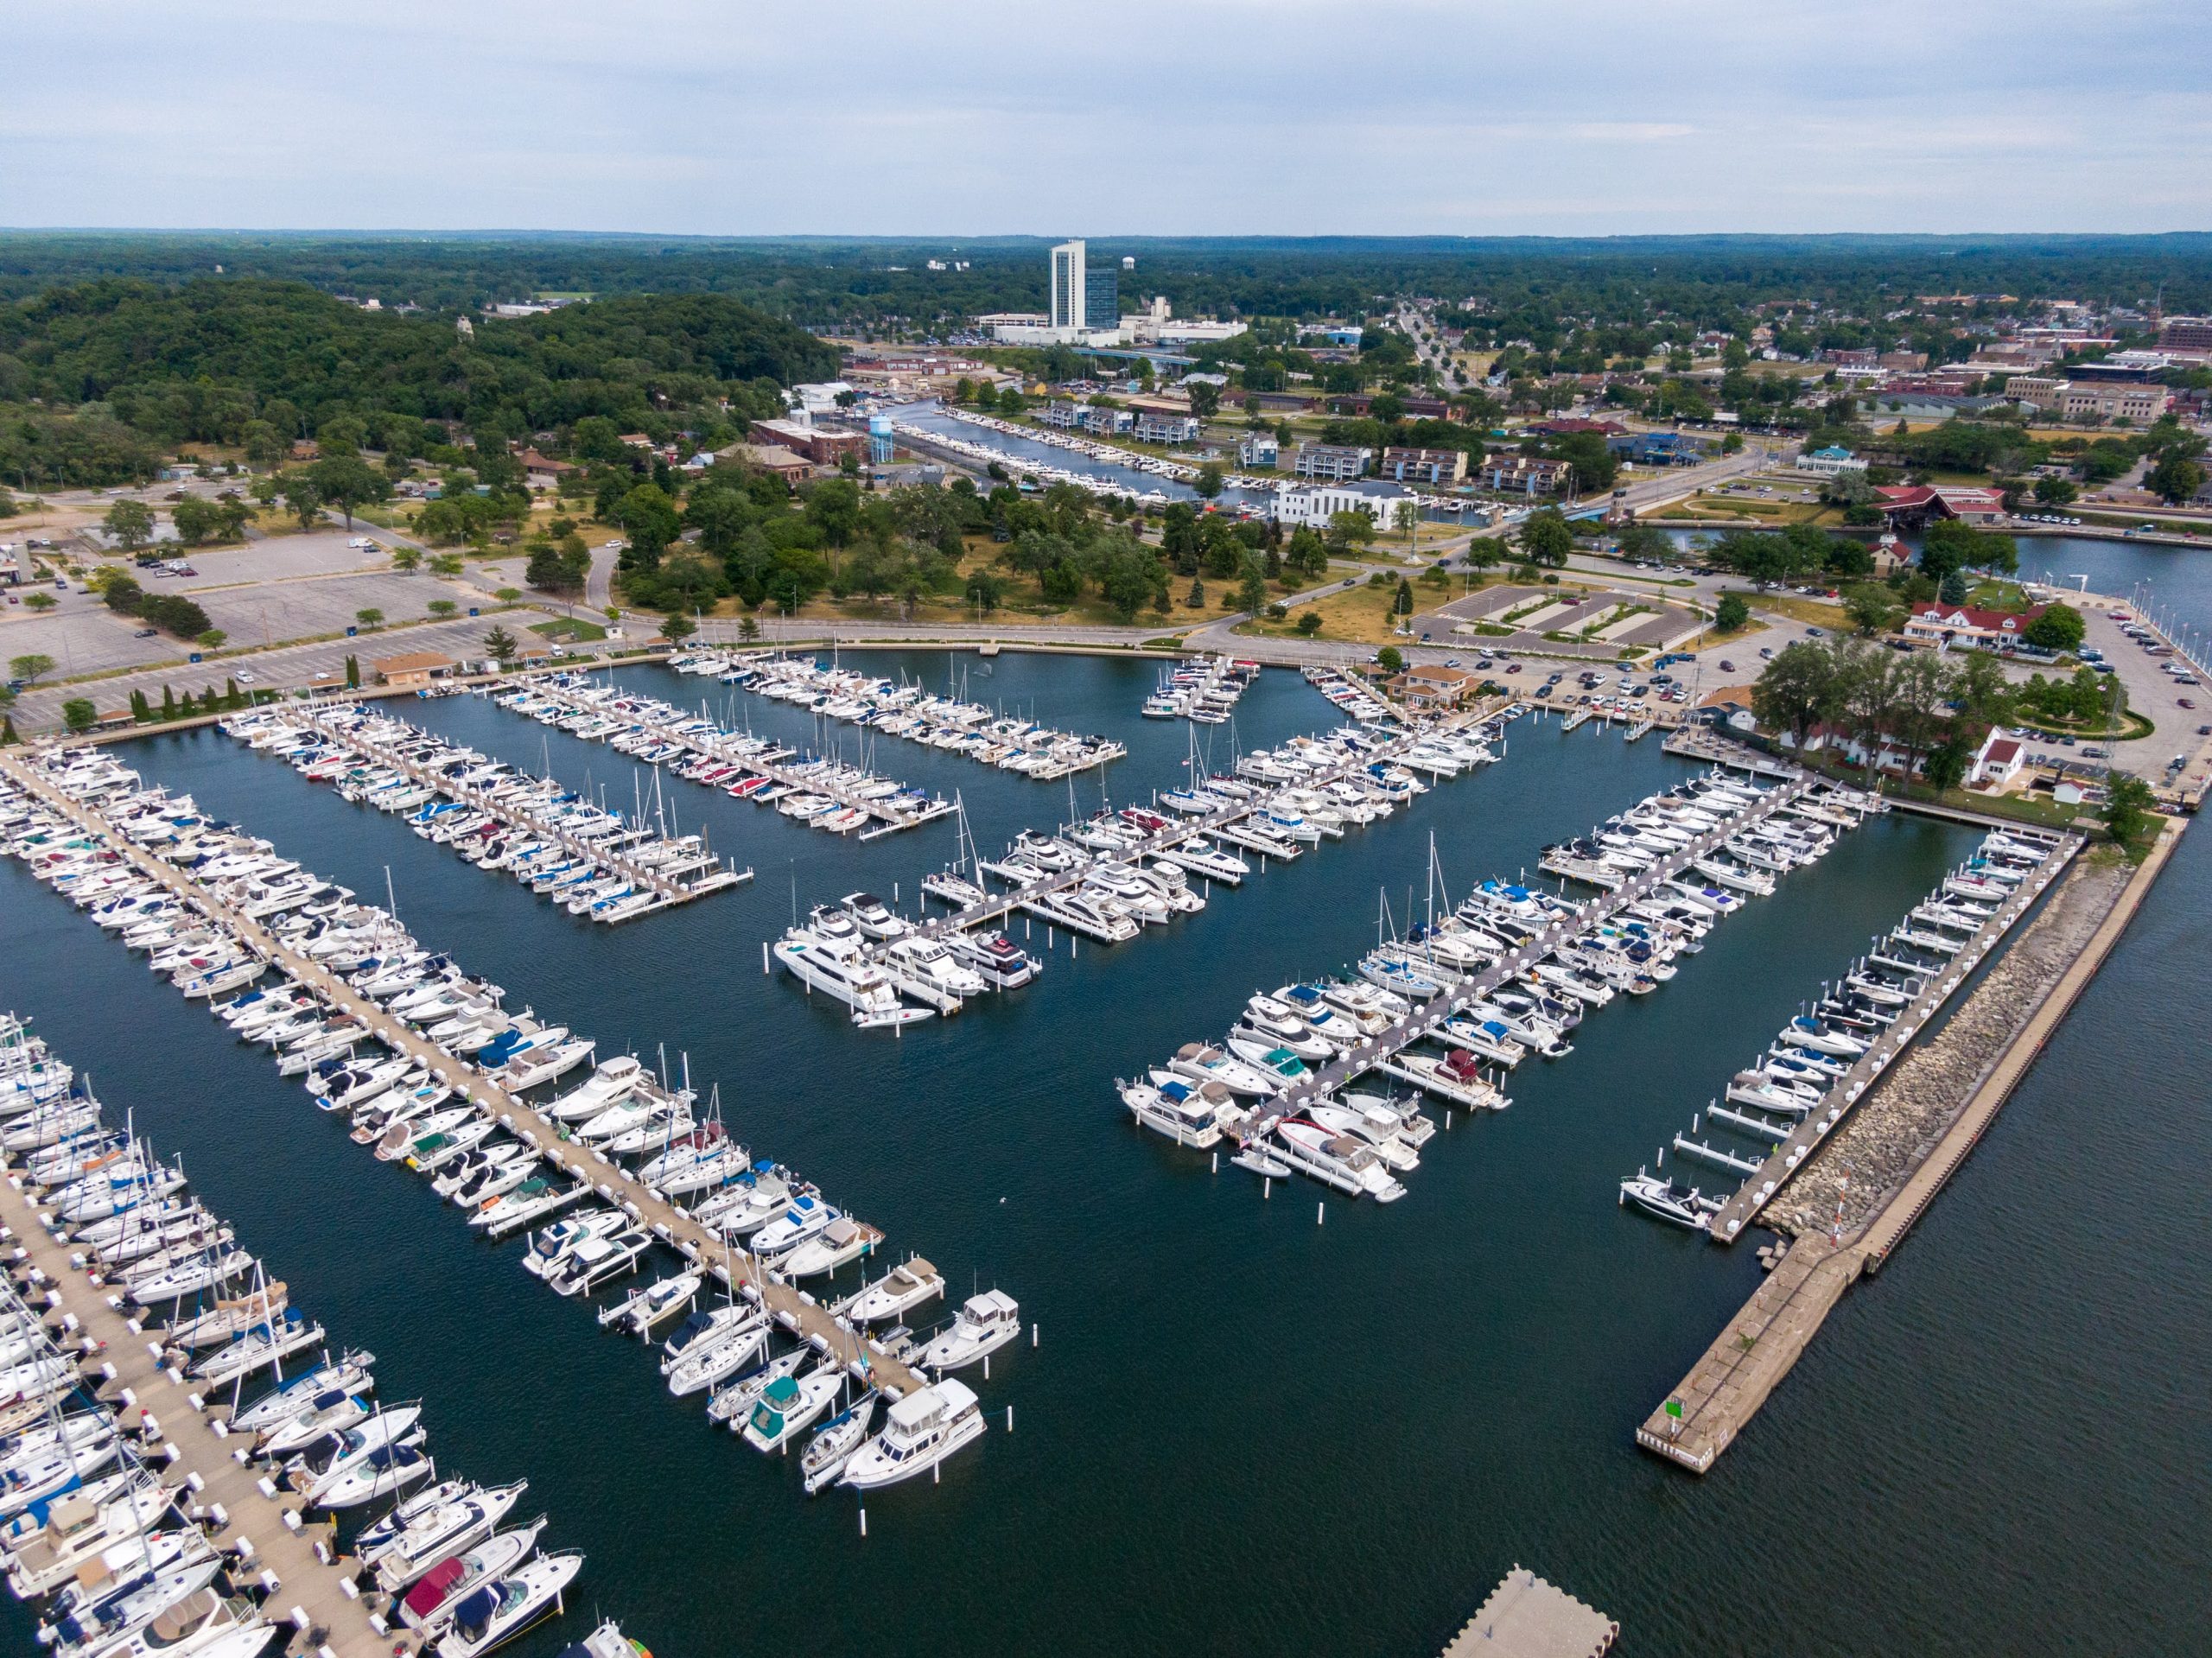 Arial view of many boats docked at the marina at Washington Park Marina Michigan City Indiana featuring Kebony modified wood clear boardwalk decking during the daytime